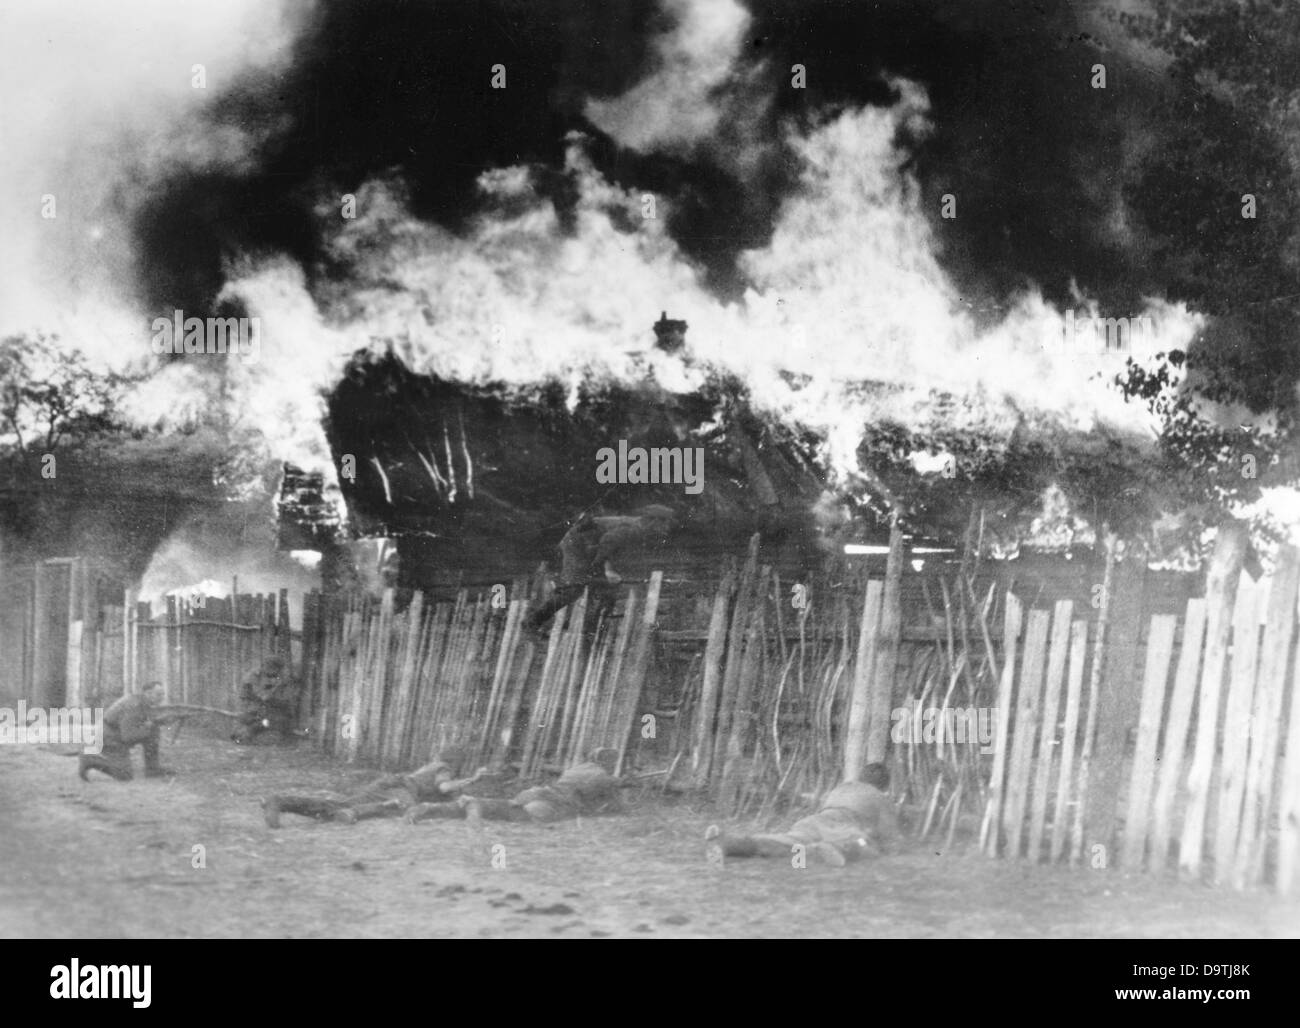 The Nazi Propaganda! on the back of the image reads: 'Military police fights with Bolshevist gangs. During the night, German police units in collaboration with tanks have encircled the bandit post tighter and tighter, which eventually burst into flames. Now, at dawn, an attack against the burning village is launched. Image from the Eastern Front/Russia, 14 October 1943. The attack on the Soviet Union by the German Reich was agreed on in July 1940 and prepared as the 'Operation Barbarossa' since December 1940. On 22 June 1941, the invasion by the German Wehrmacht started. Photo: Berliner Verlag Stock Photo